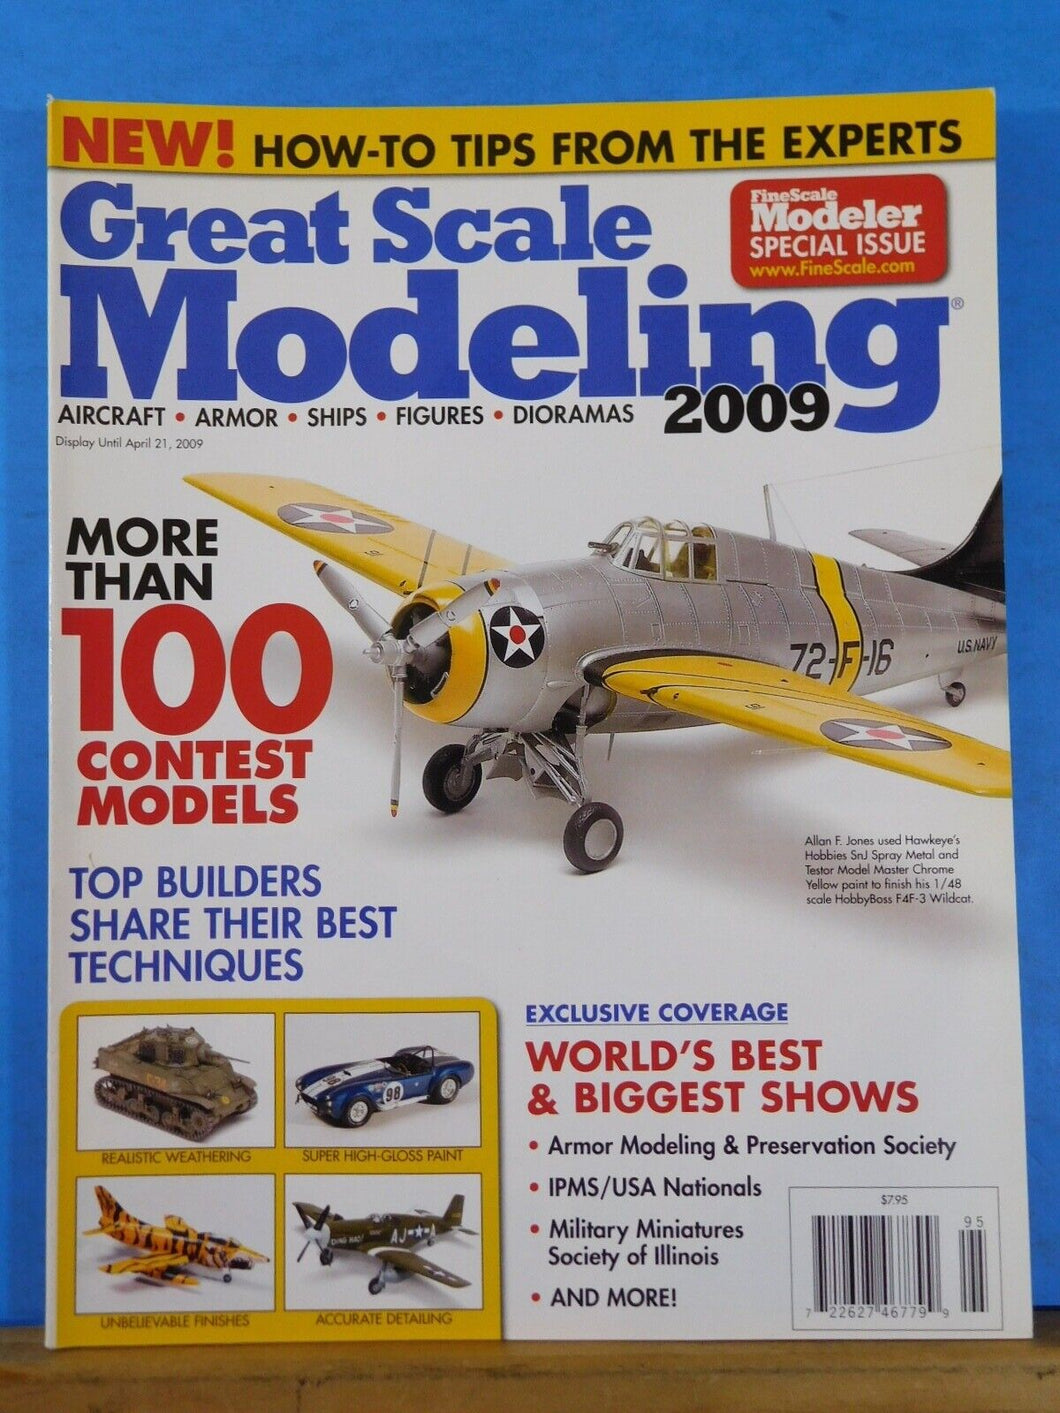 Great Scale Modeling 2009 Special Issue FineScale Modeler